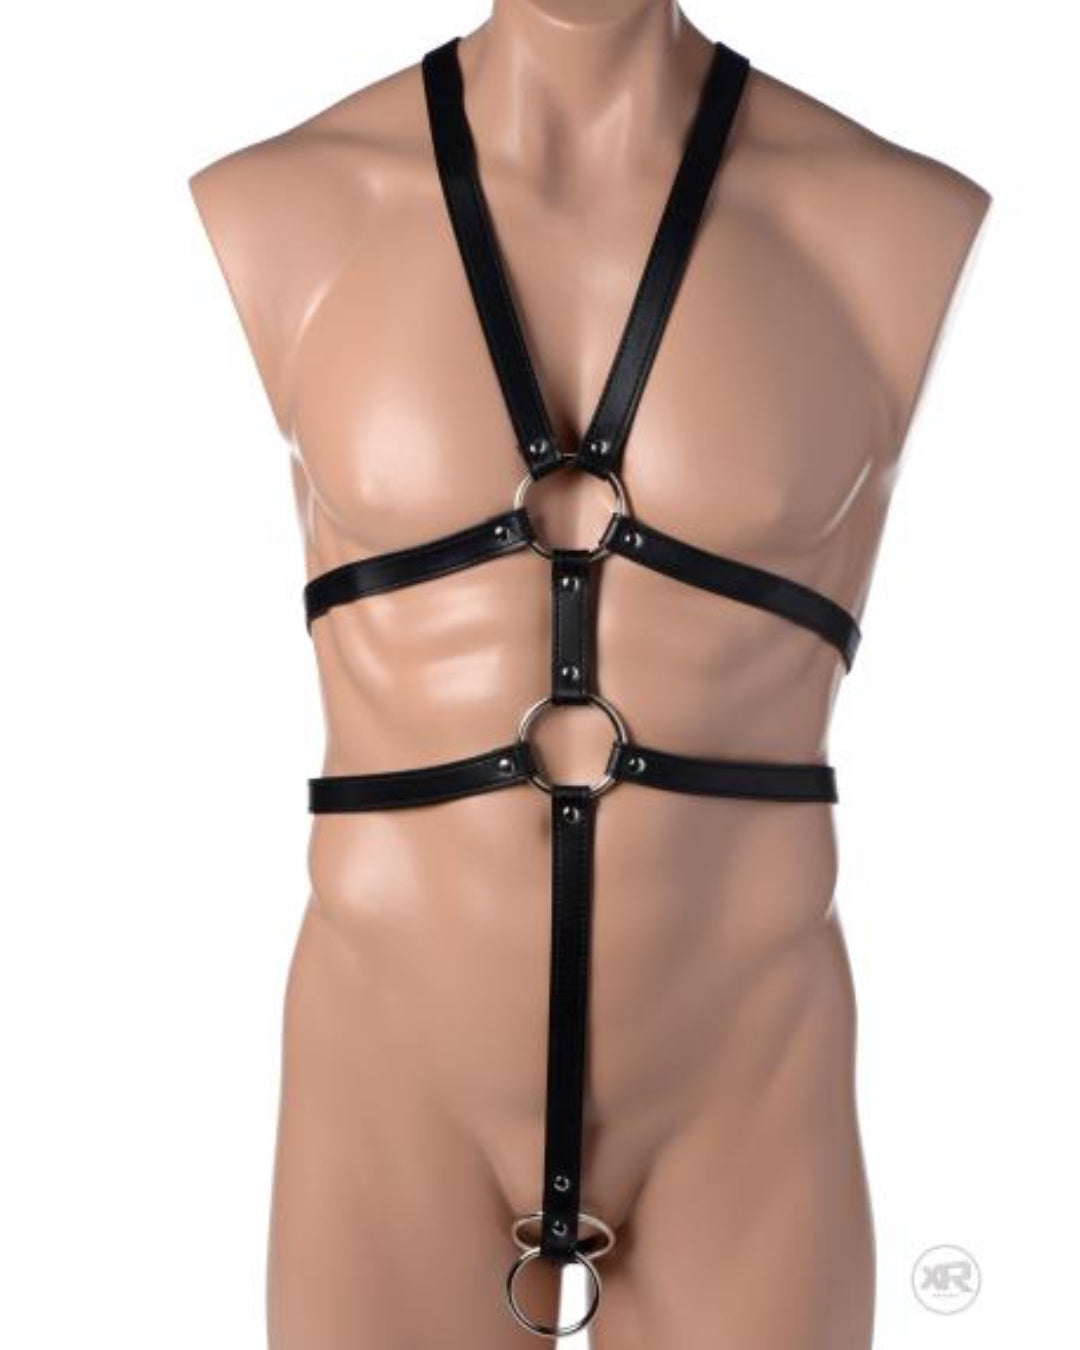 Male Full Body Leather Harness - Black  on body